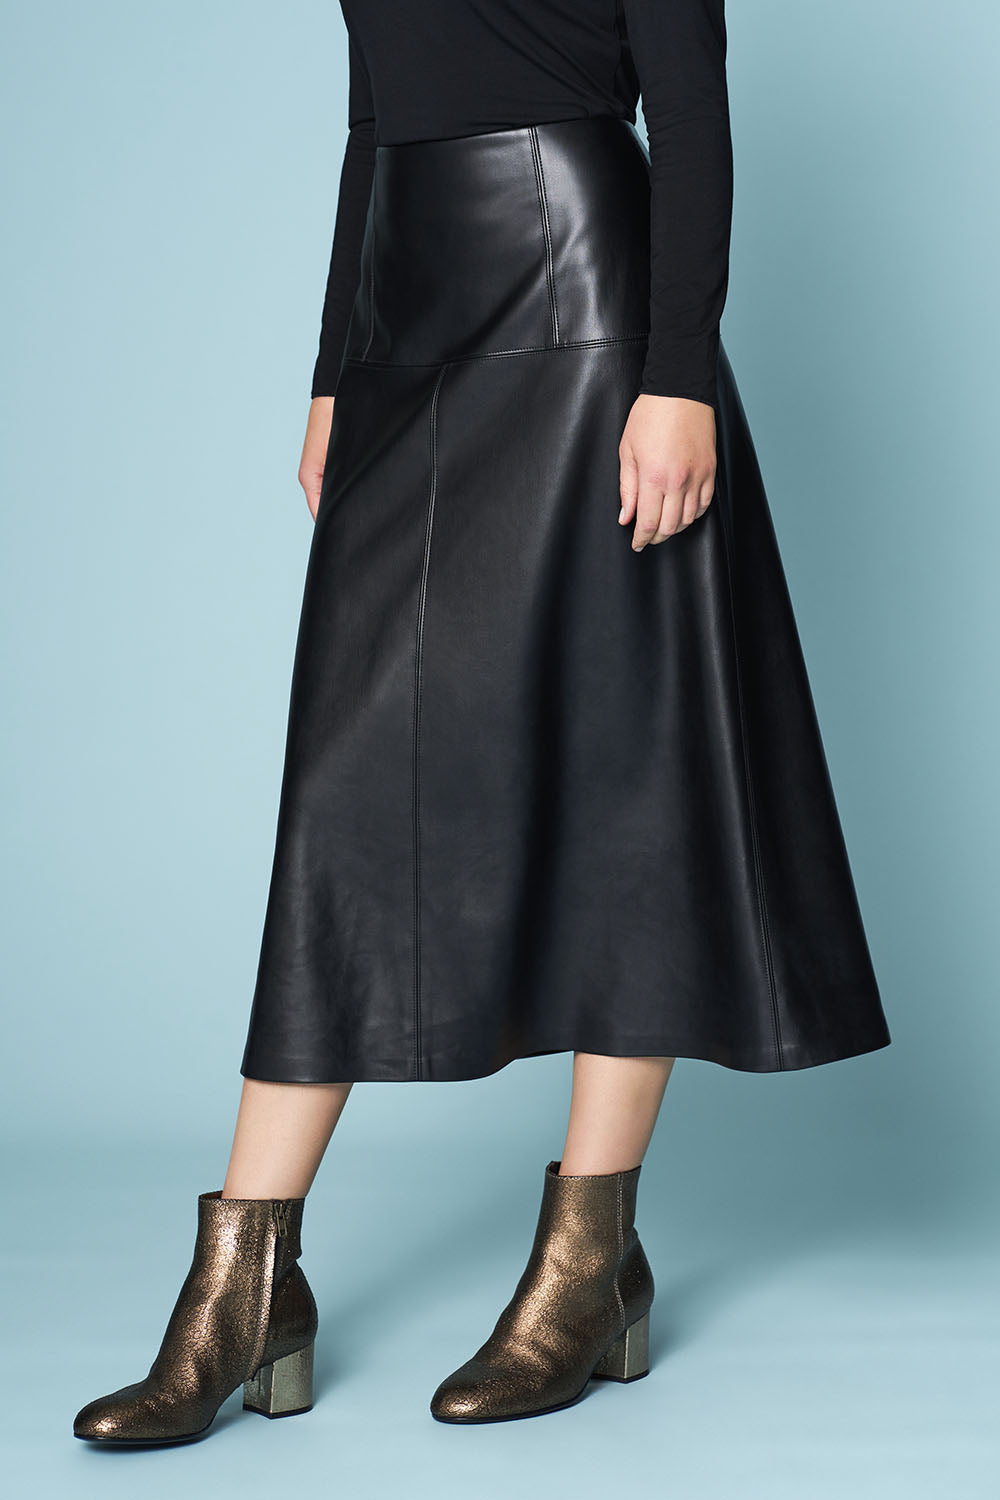 Women's Faux Leather Plus-Size Skirts | Nordstrom